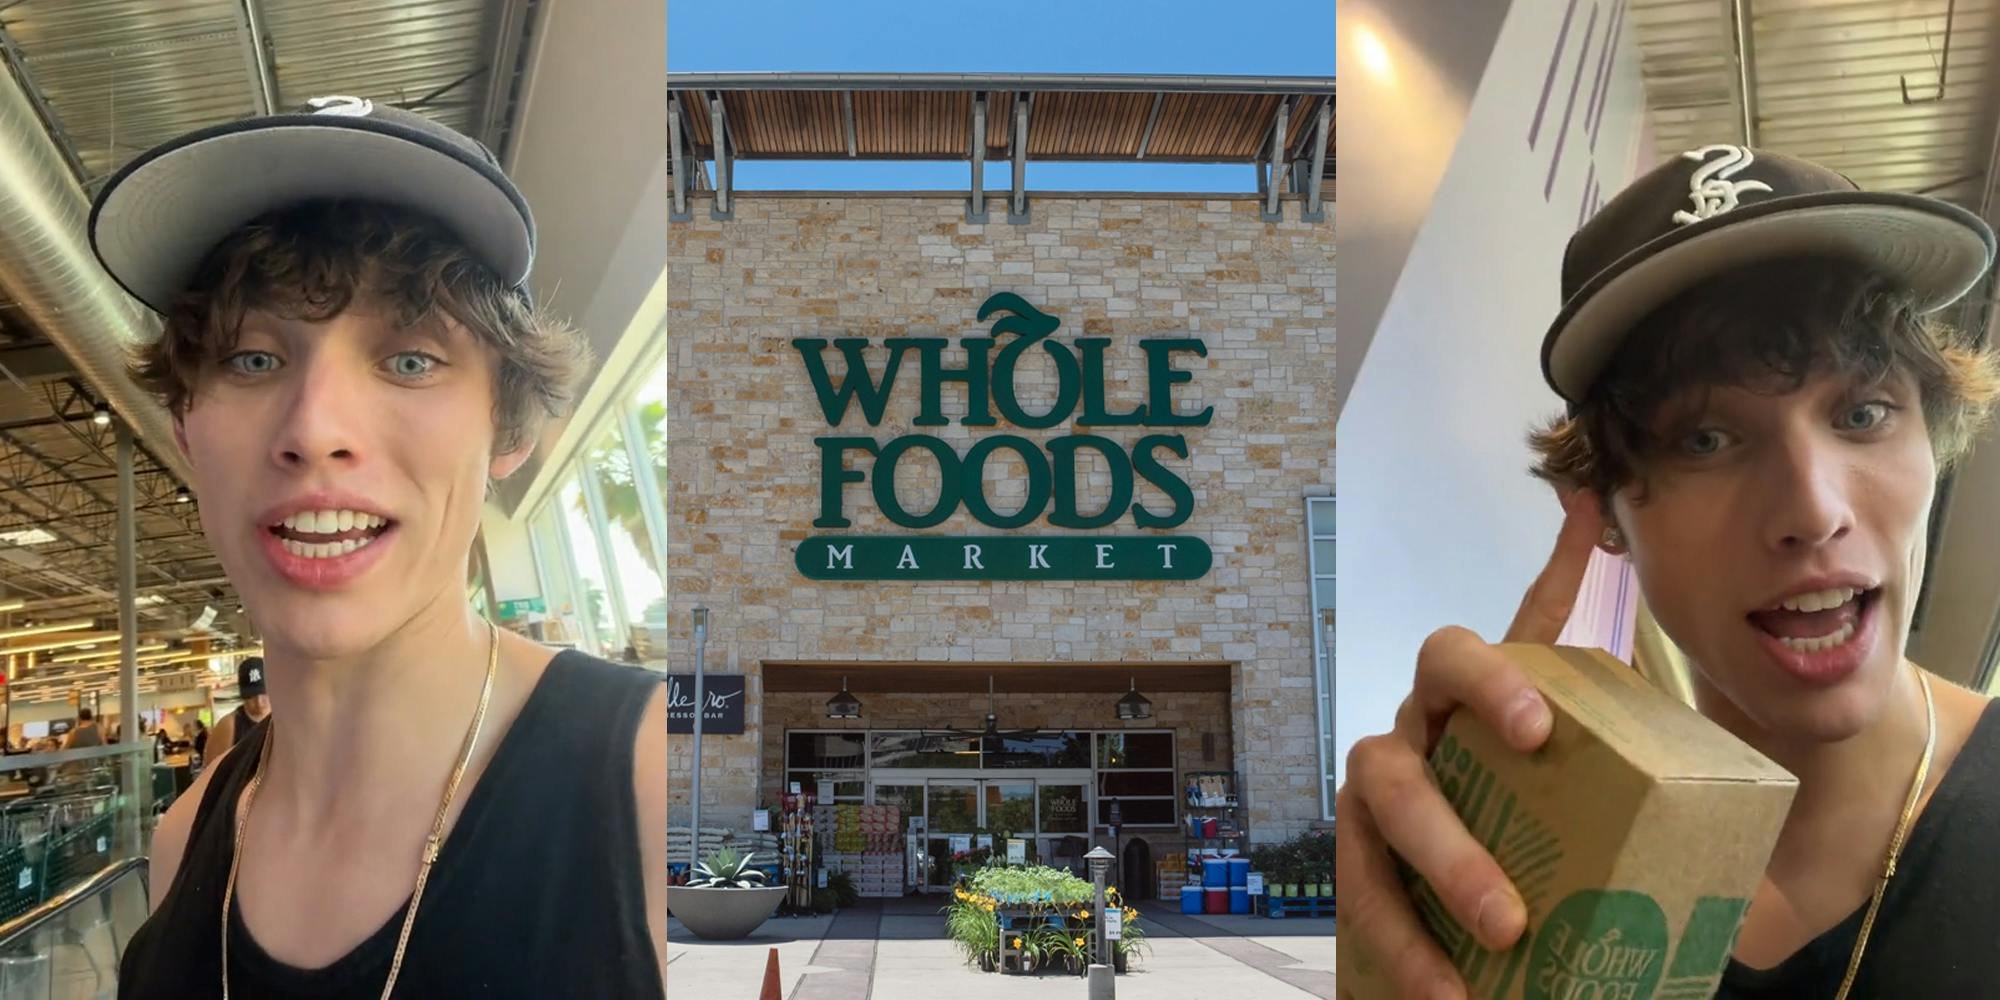 ‘They watched me do it one time and came over and demonstrated how to do it correctly’: Whole Foods customer shares unethical life hack to only weighing one-fifth of the hot bar food box